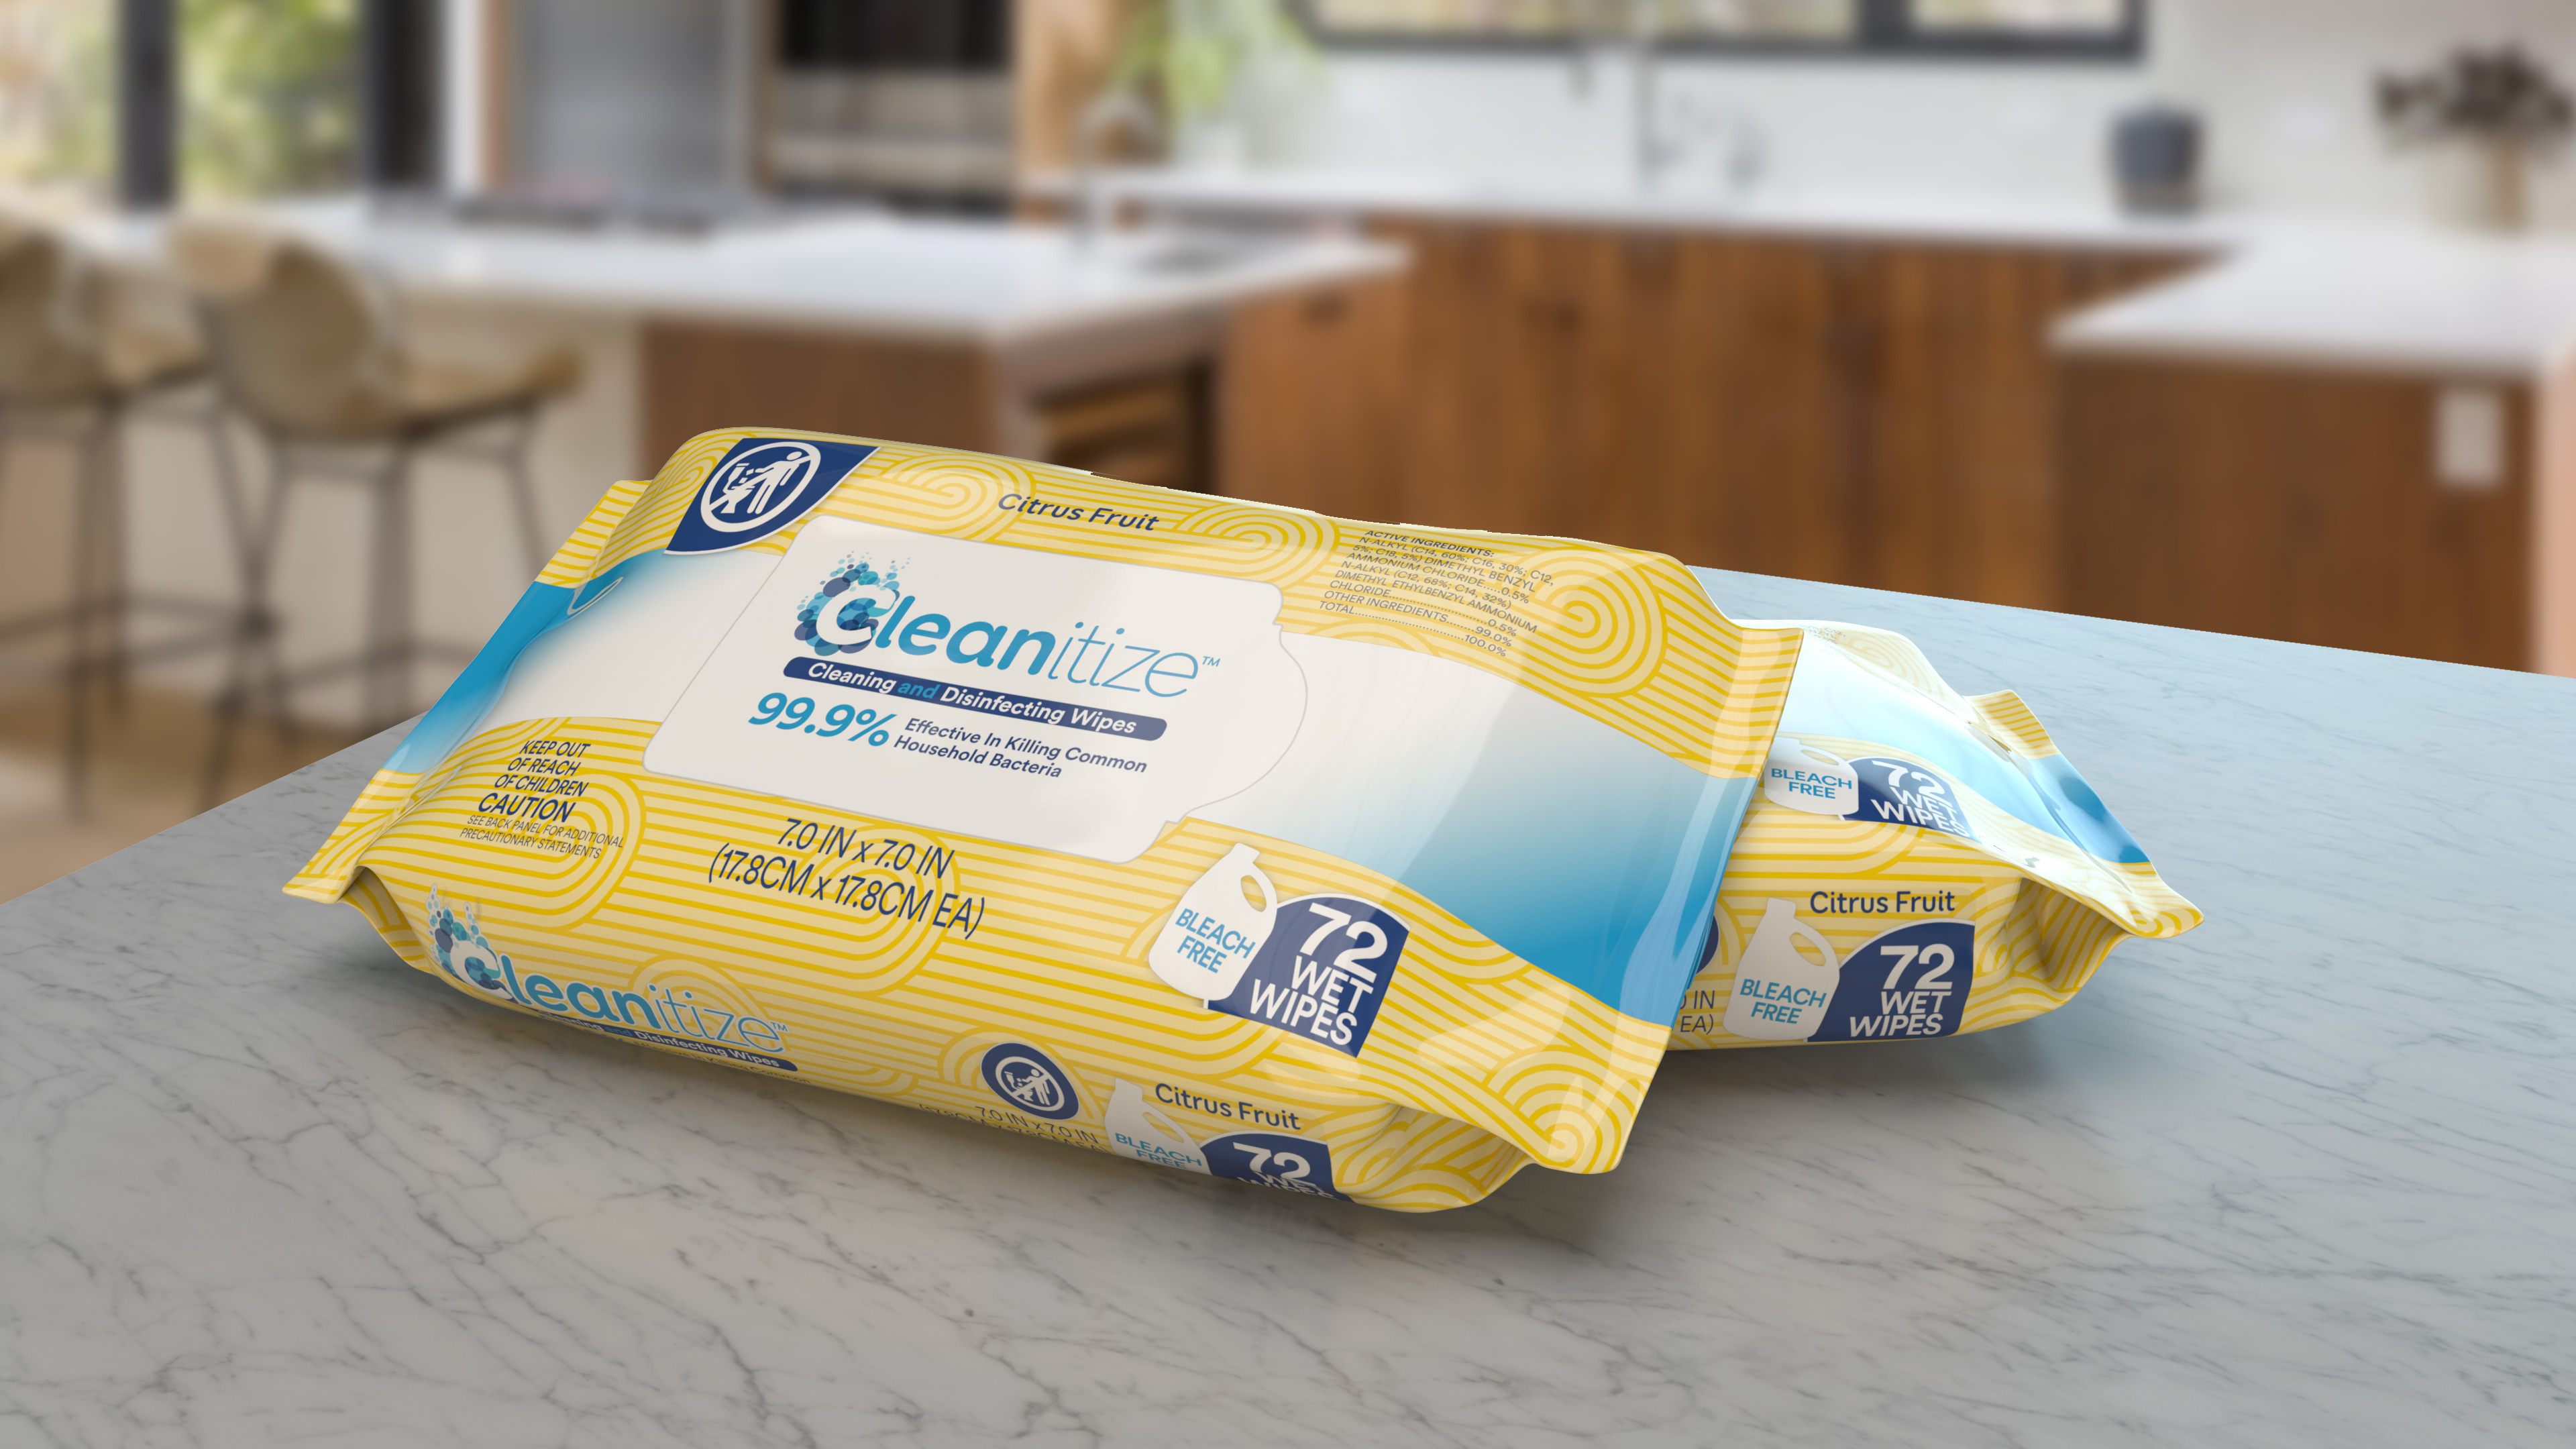 Albaad (Global) on LinkedIn: Household Cleaning Wipes by Albaad